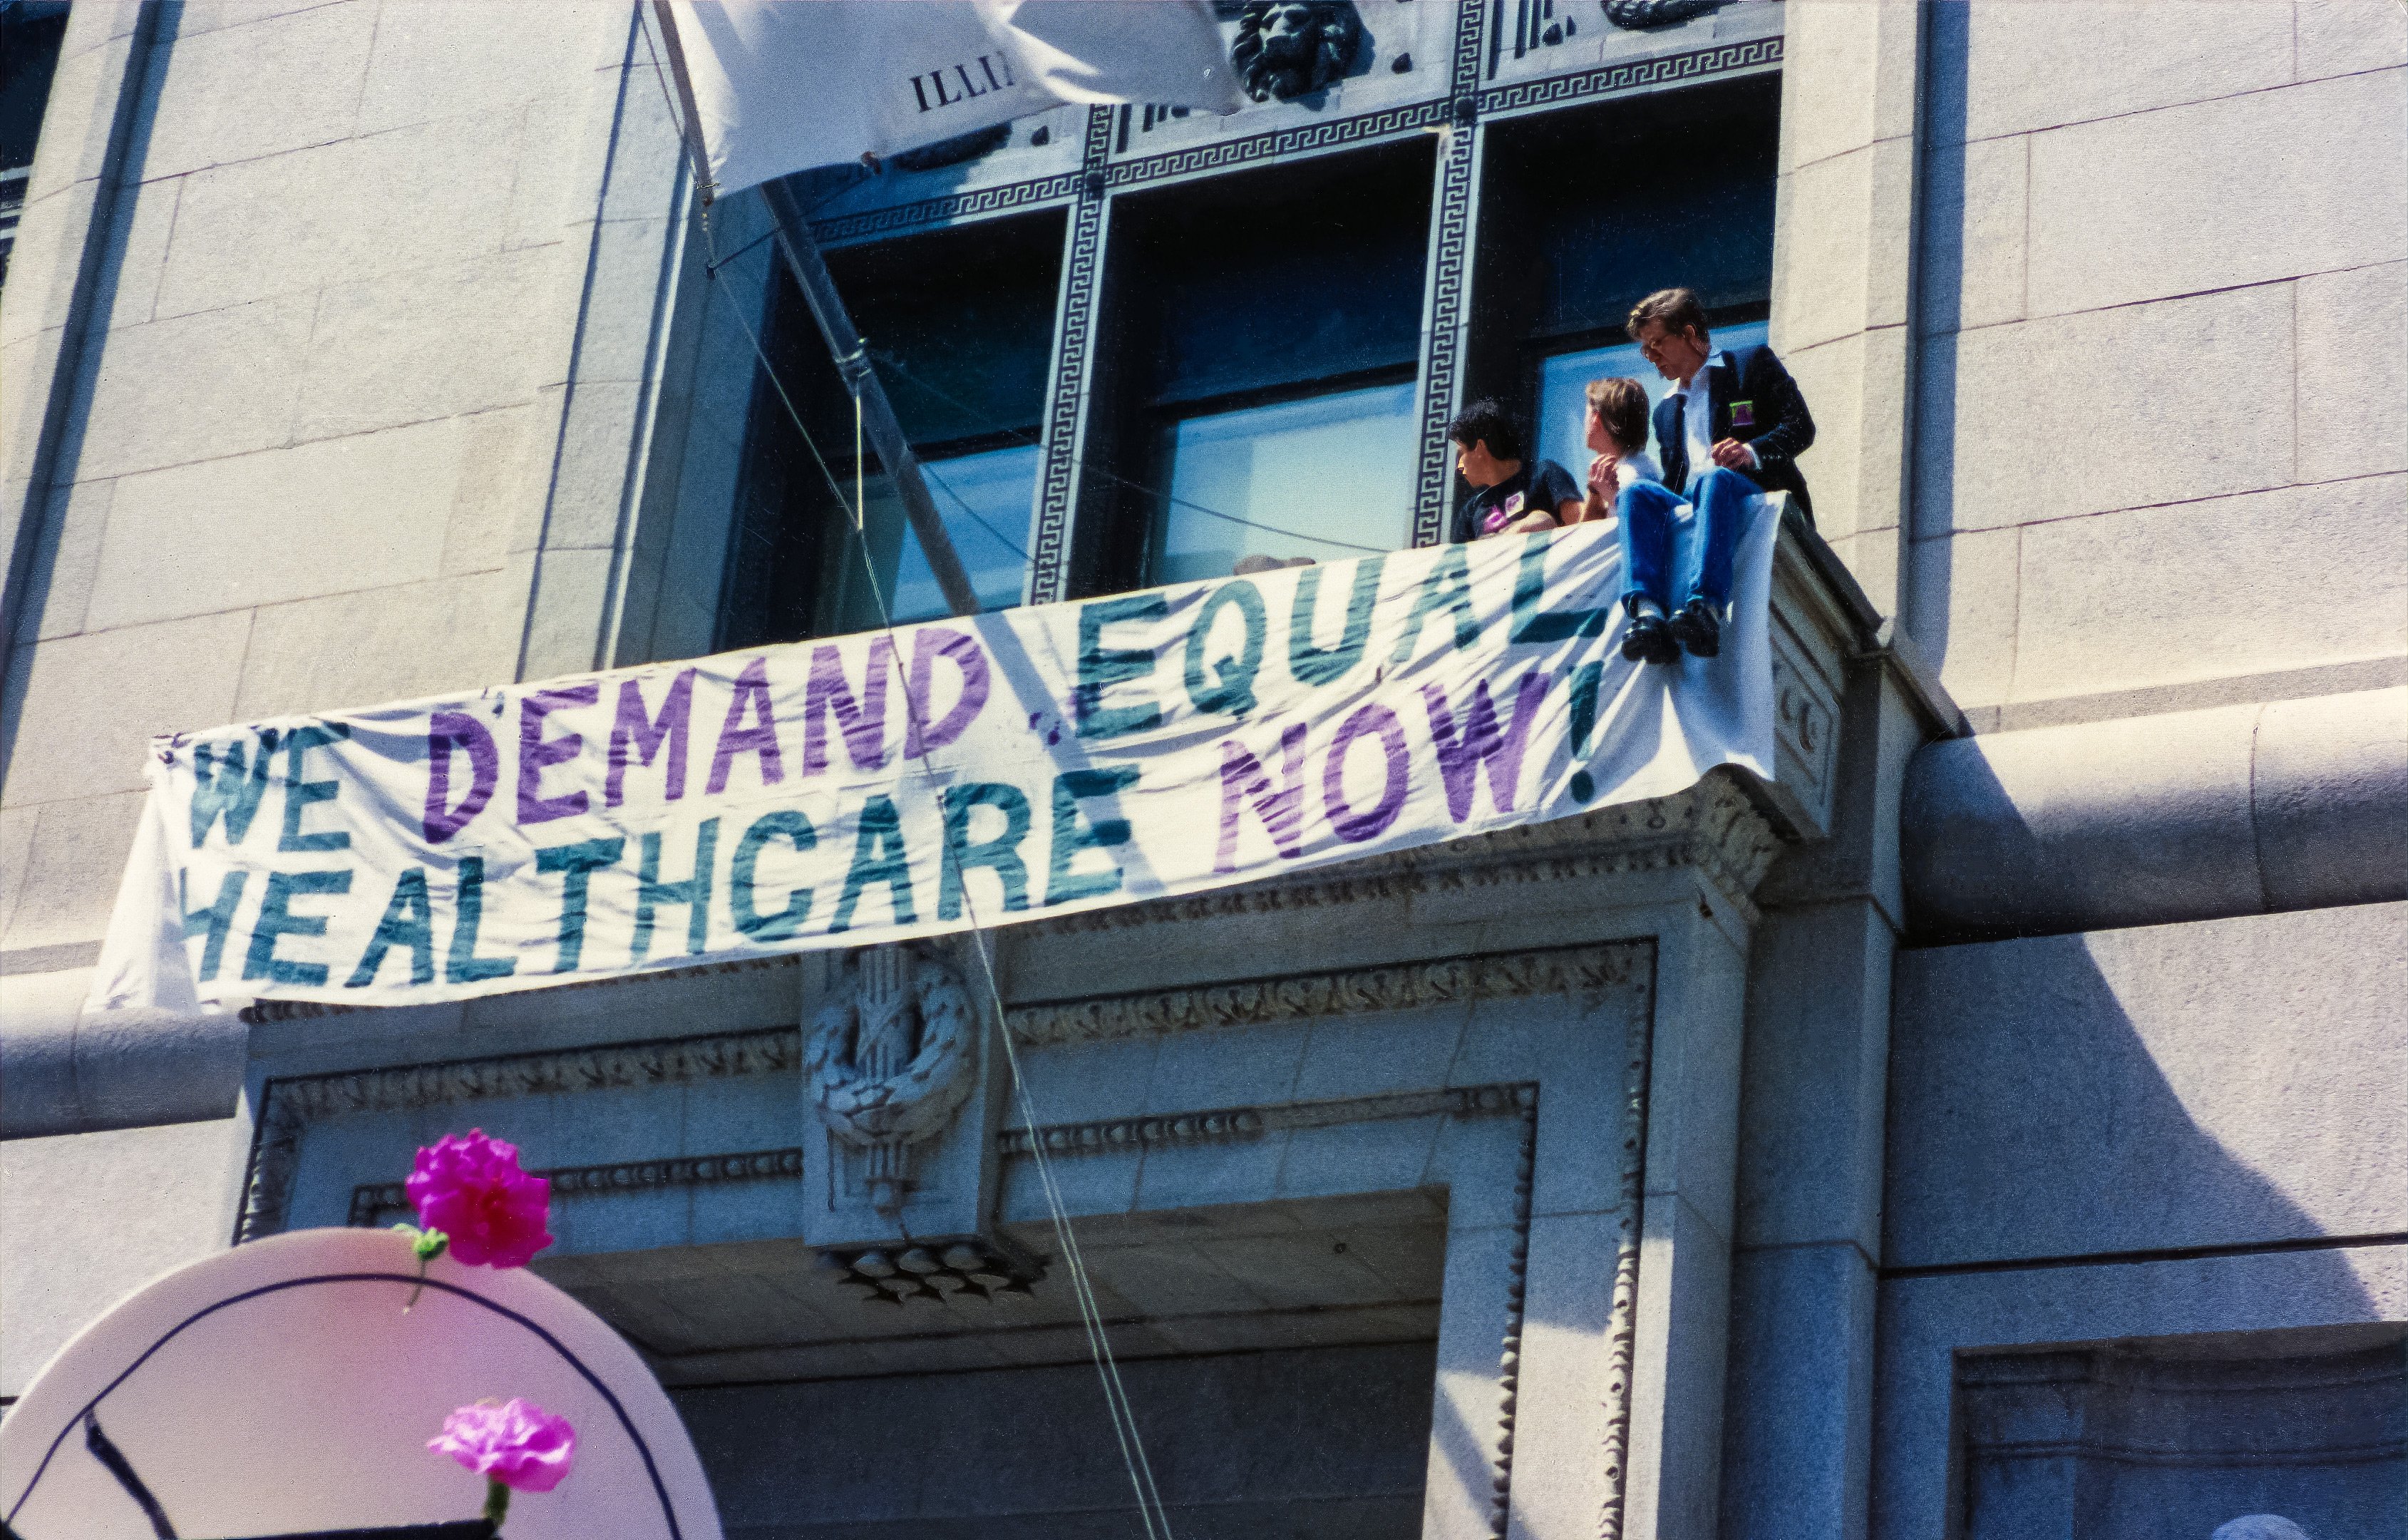 Danny Sotomayor, Bill McMillan, Tim Miller, Frank Sieple, and Paul Adams unfurled the “We Demand Equal Healthcare Now” banner outside a window at the County Building.